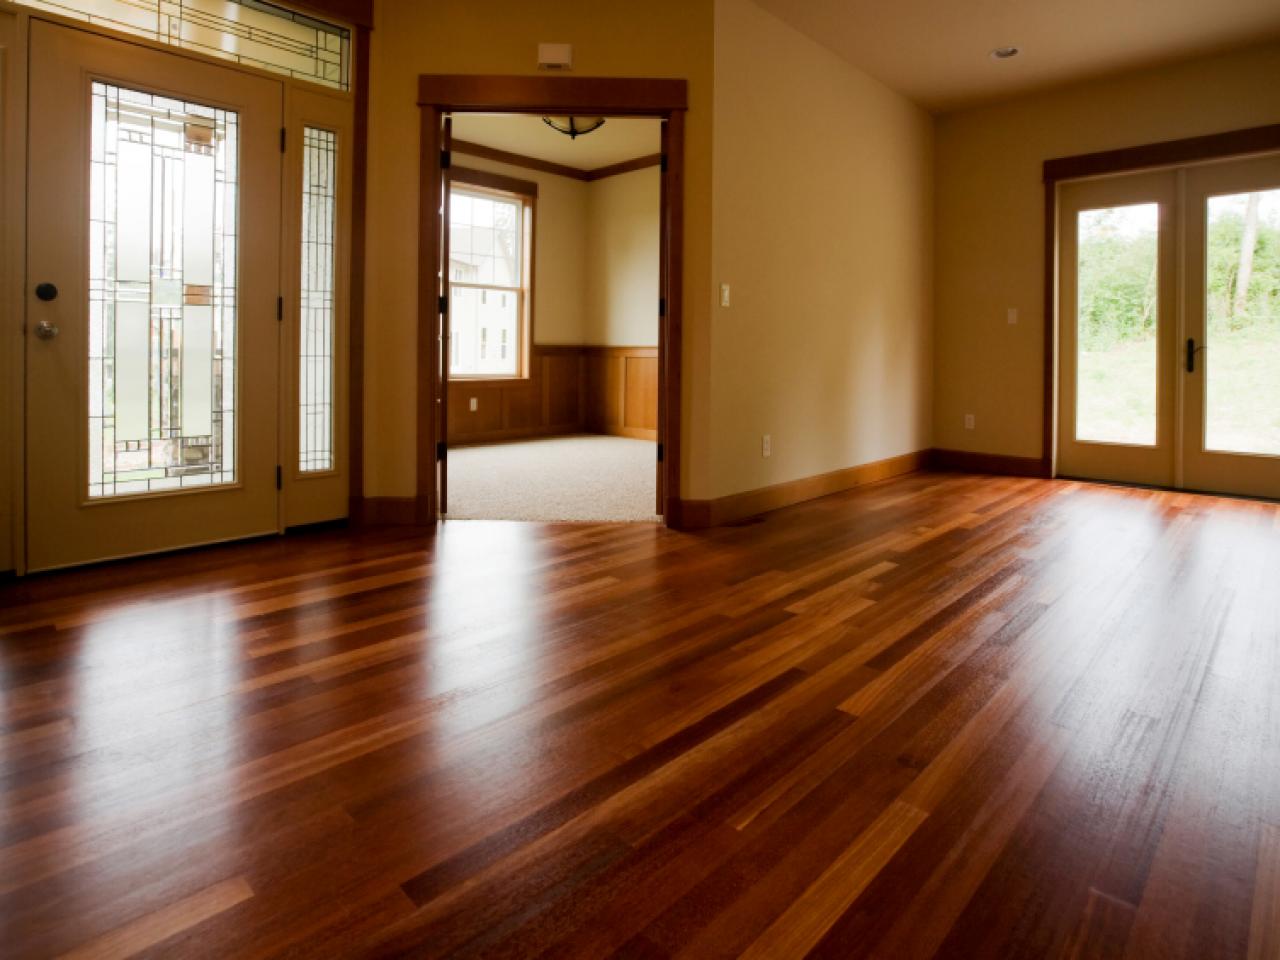 Cleaning Tile Wood And Vinyl Floors, Hardwood Flooring Pictures In Homes